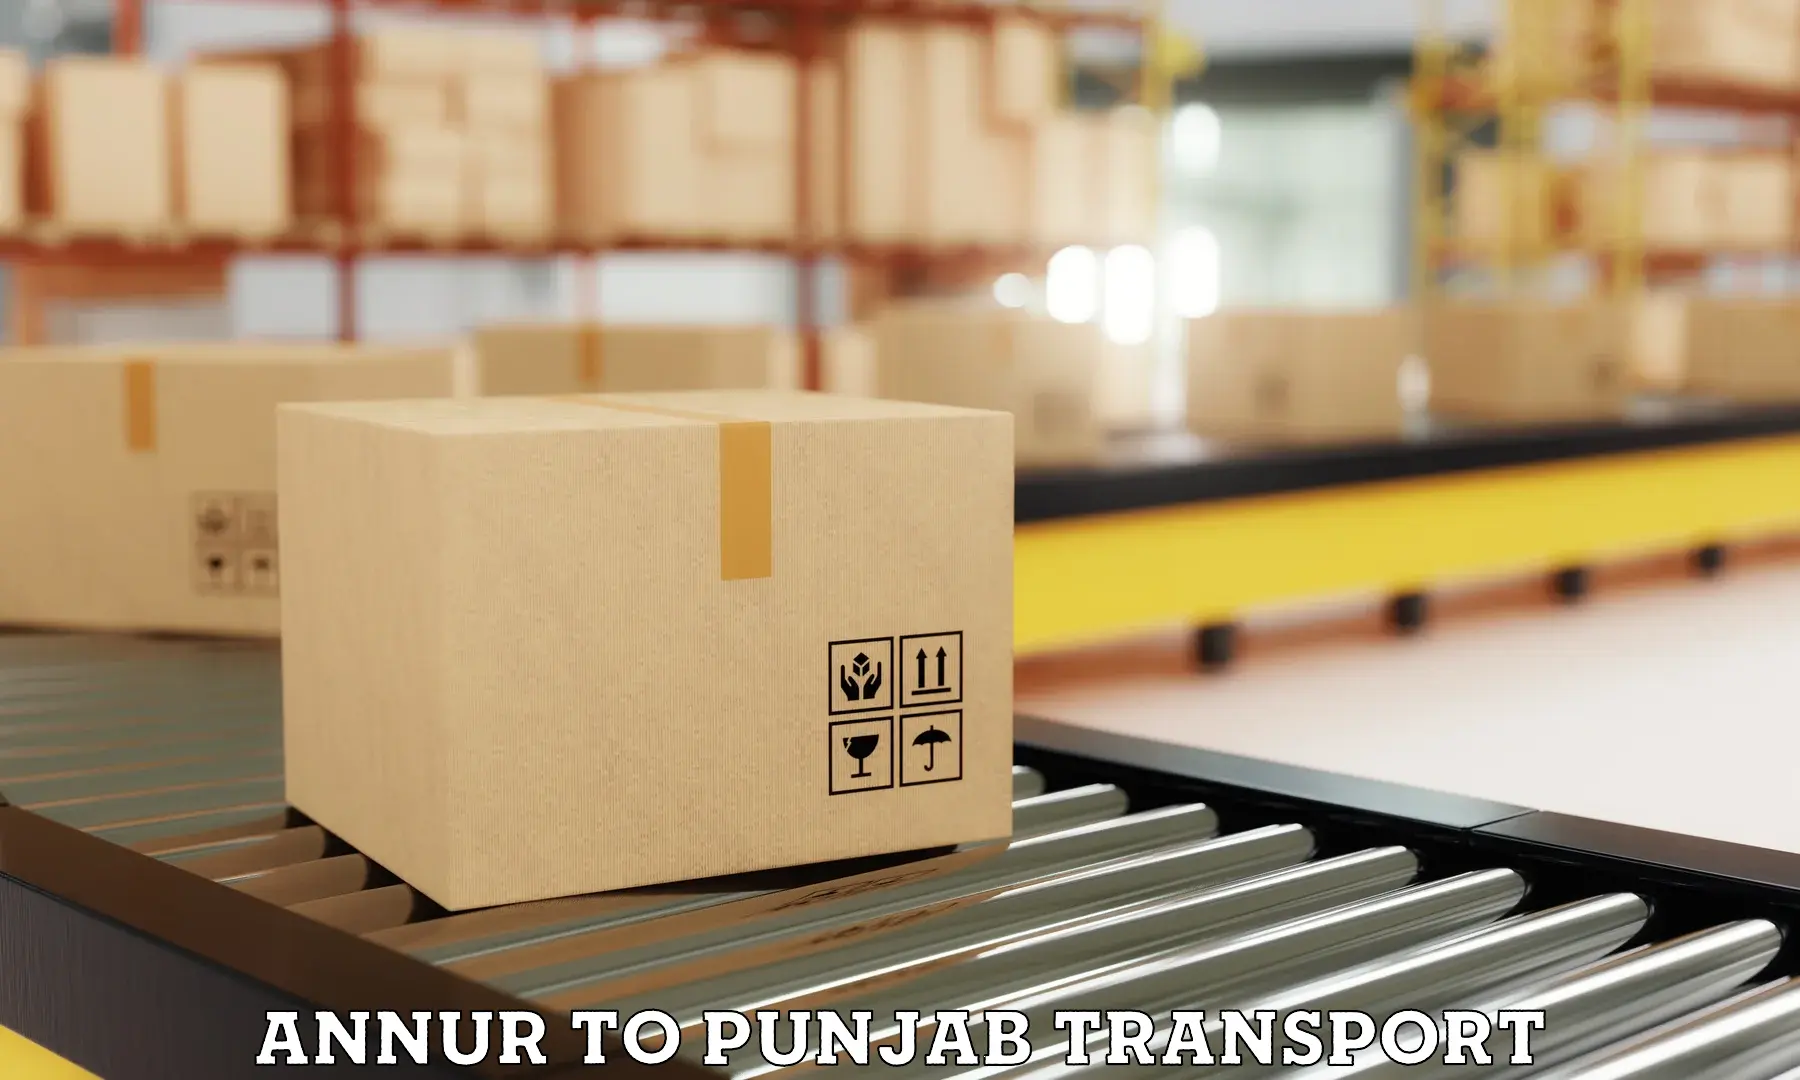 Daily parcel service transport Annur to Punjab